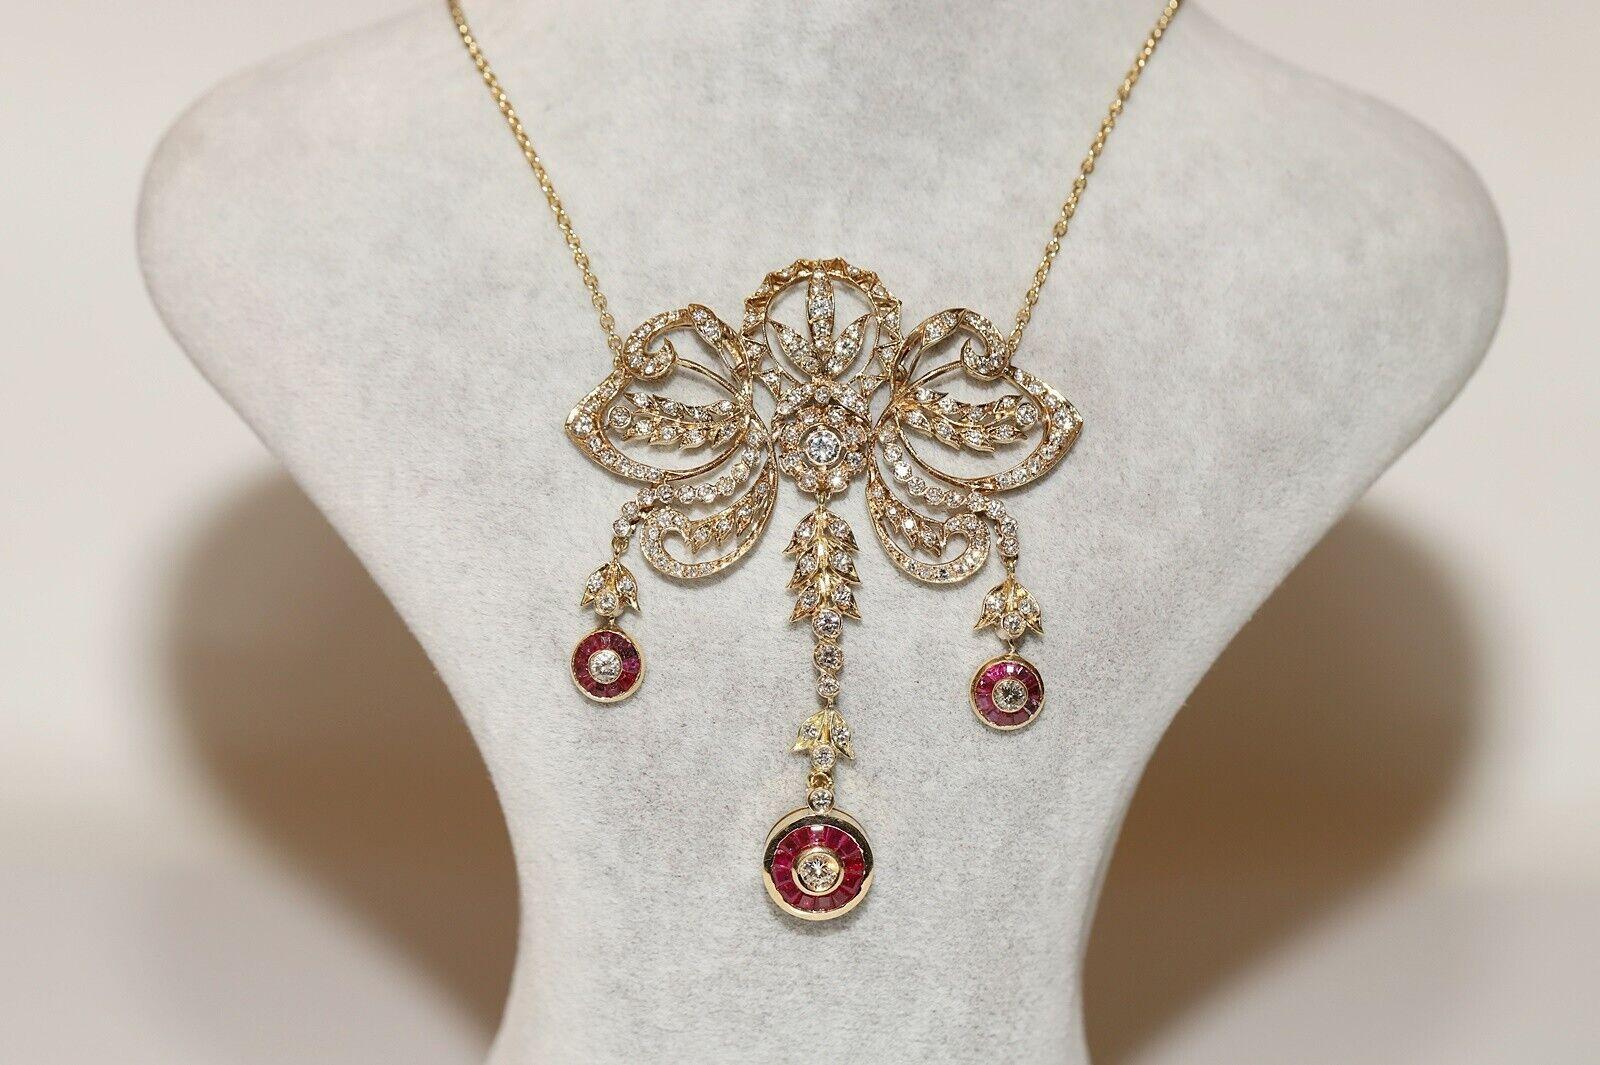 In very good condition.
Total weight is 19.8 grams.
Diamond totally is about 3.40 carat.
The diamond is has  G-H color and vvs-vs-s1 clarity.
Original vintage item about 40-50 years old.
Ruby totally is about 0.95 carat.
Total chain lenght is 55